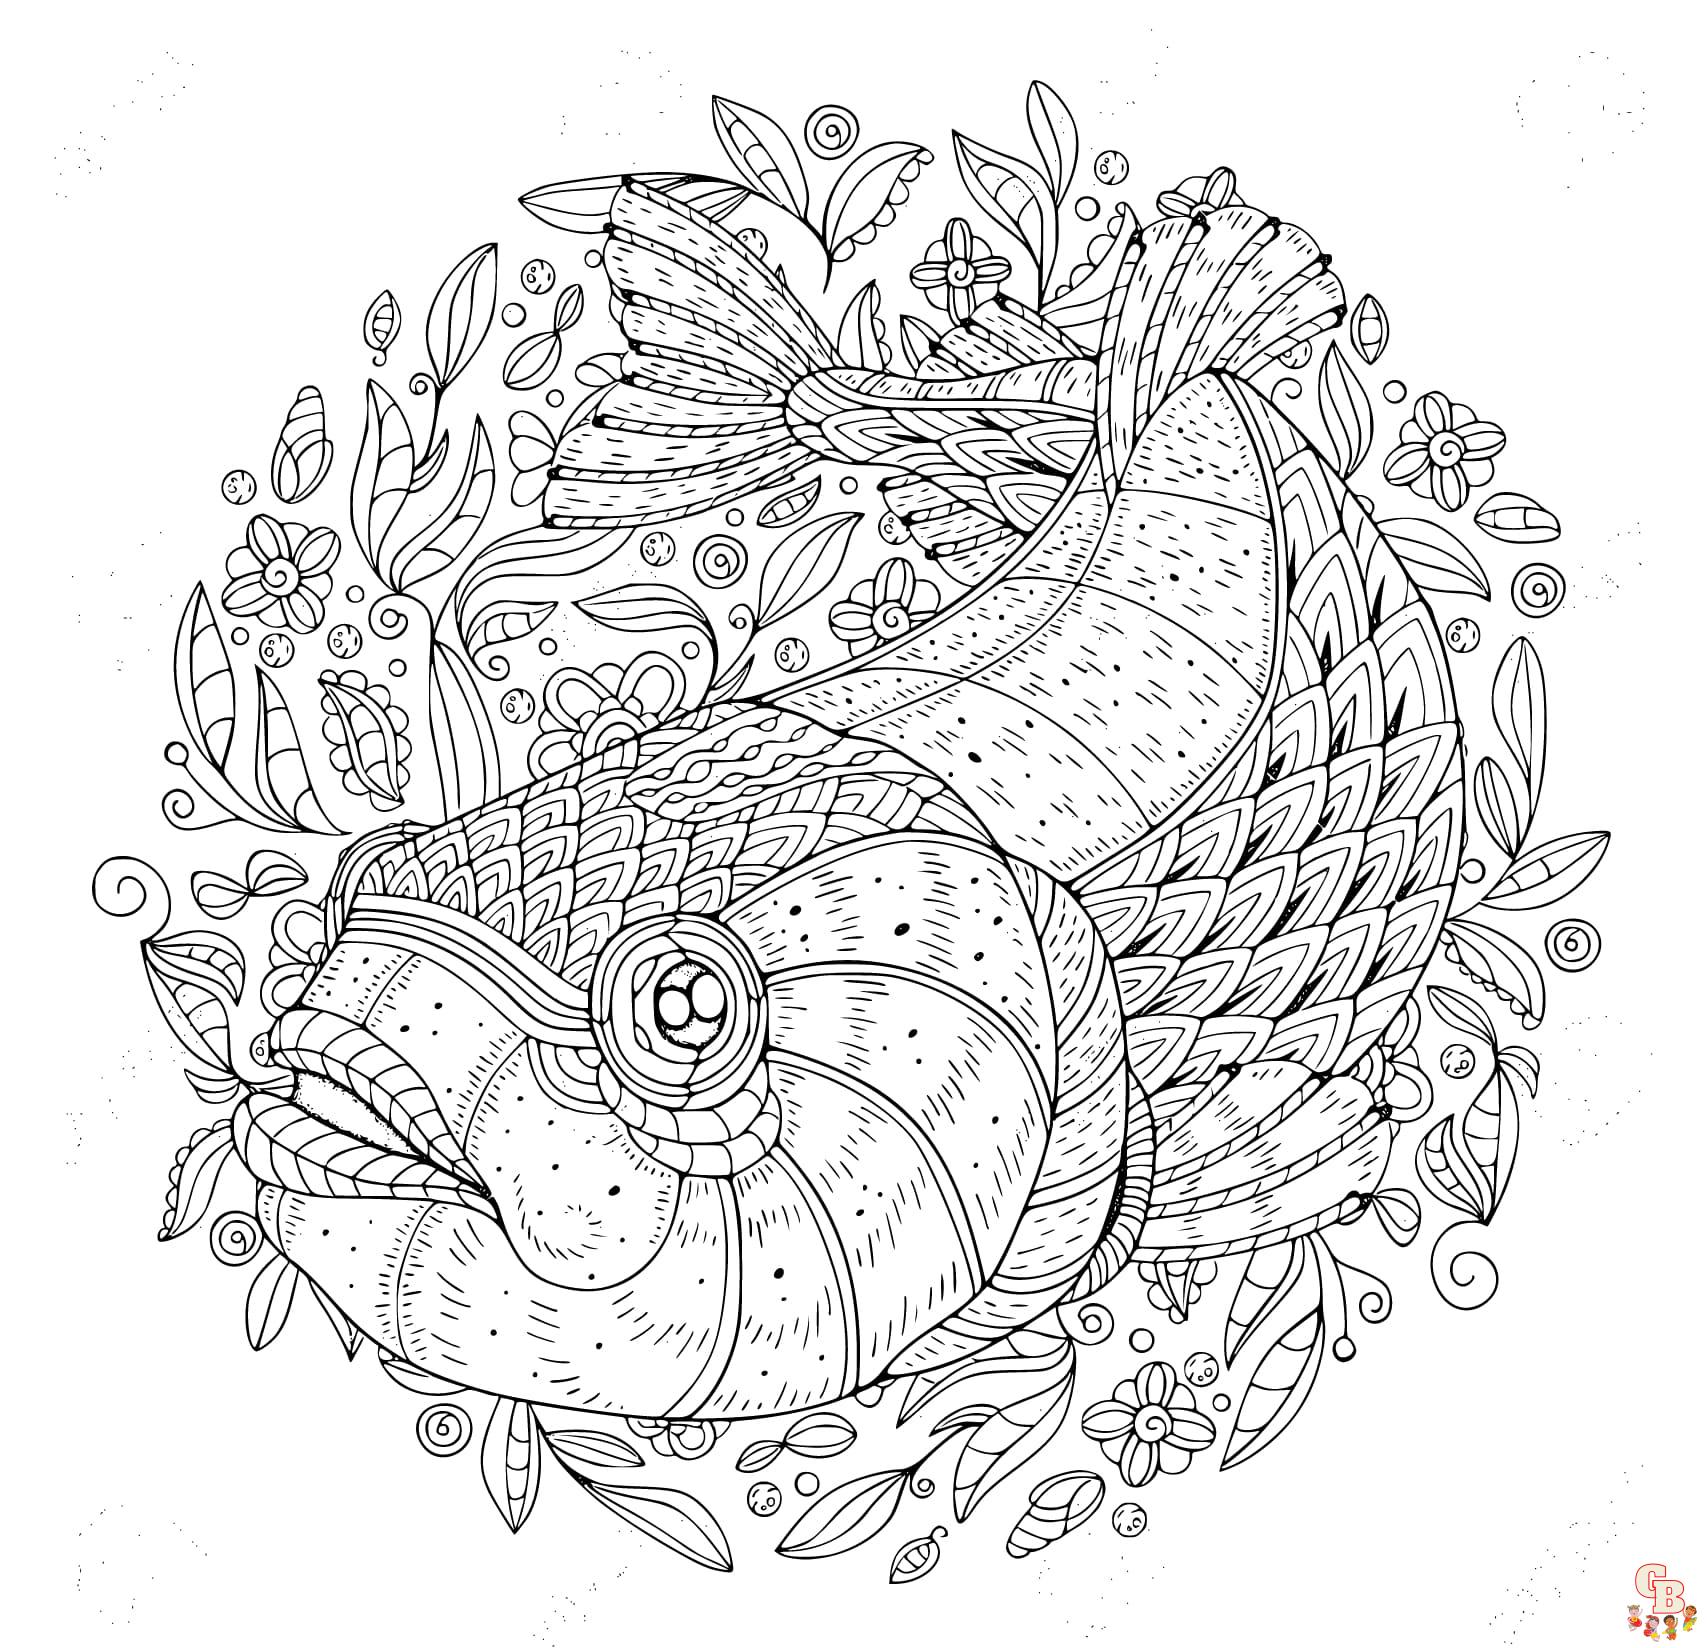 Trout Coloring Pages